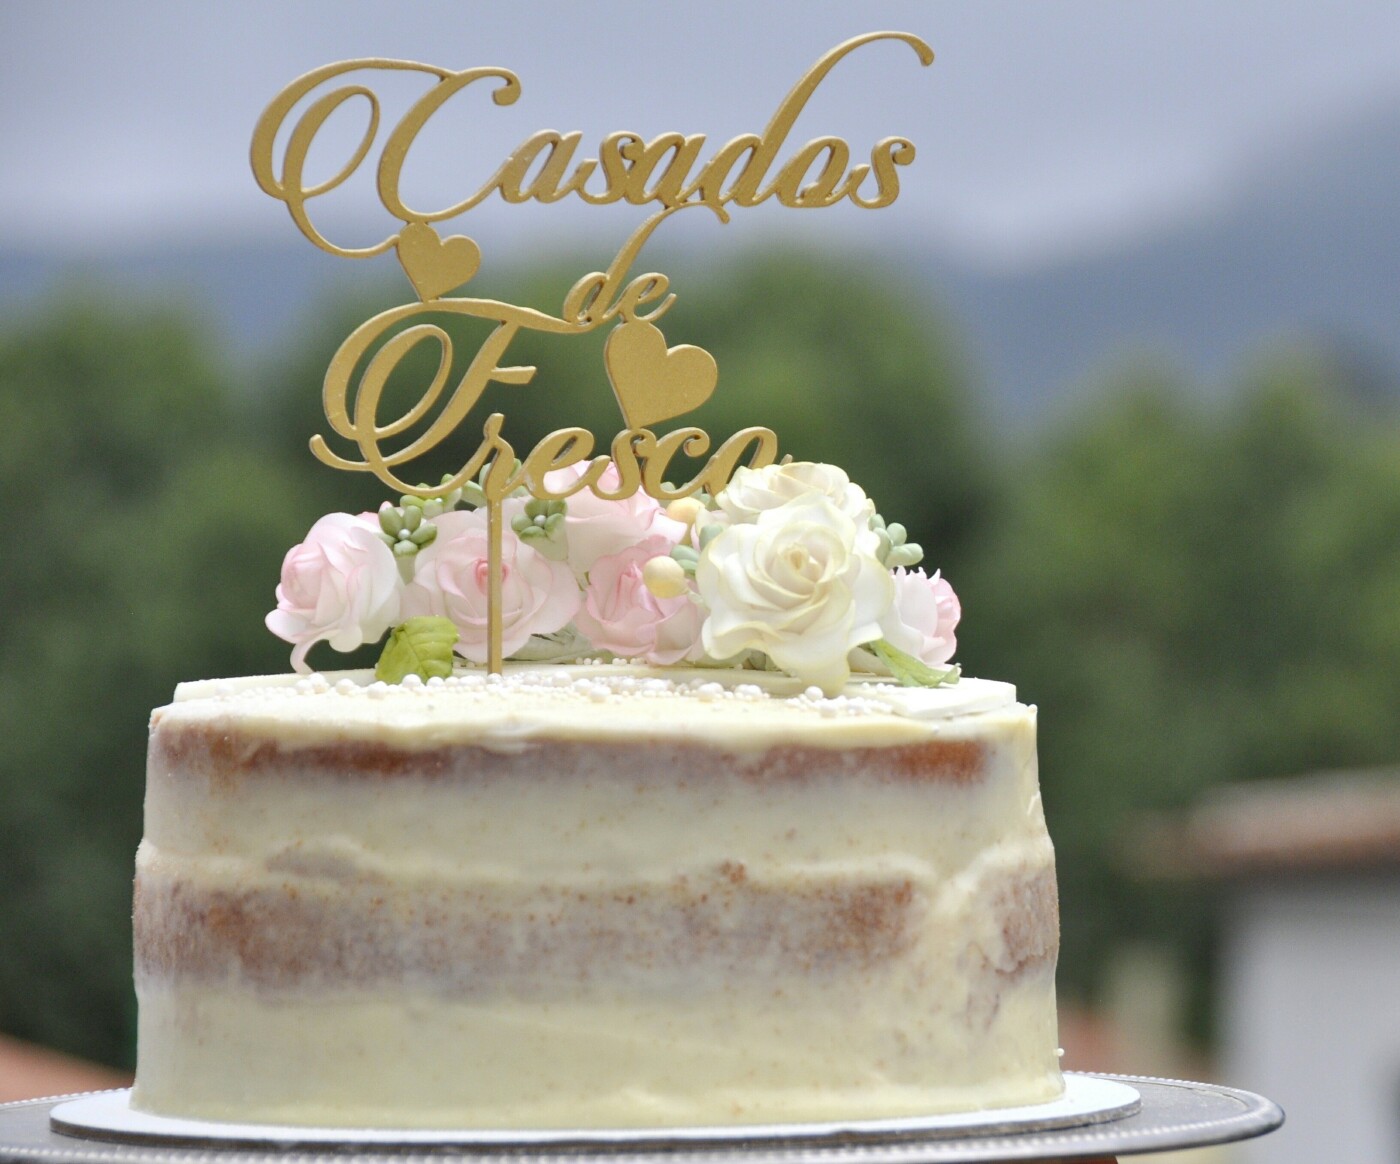 I have made this cake for a couple that got married in the magic city of Sintra on July. The sugar flowers were handmade and represented the bride and groom and each of the guests. It was a meaningful cake for a very special day in the beautiful light of Sintra. 